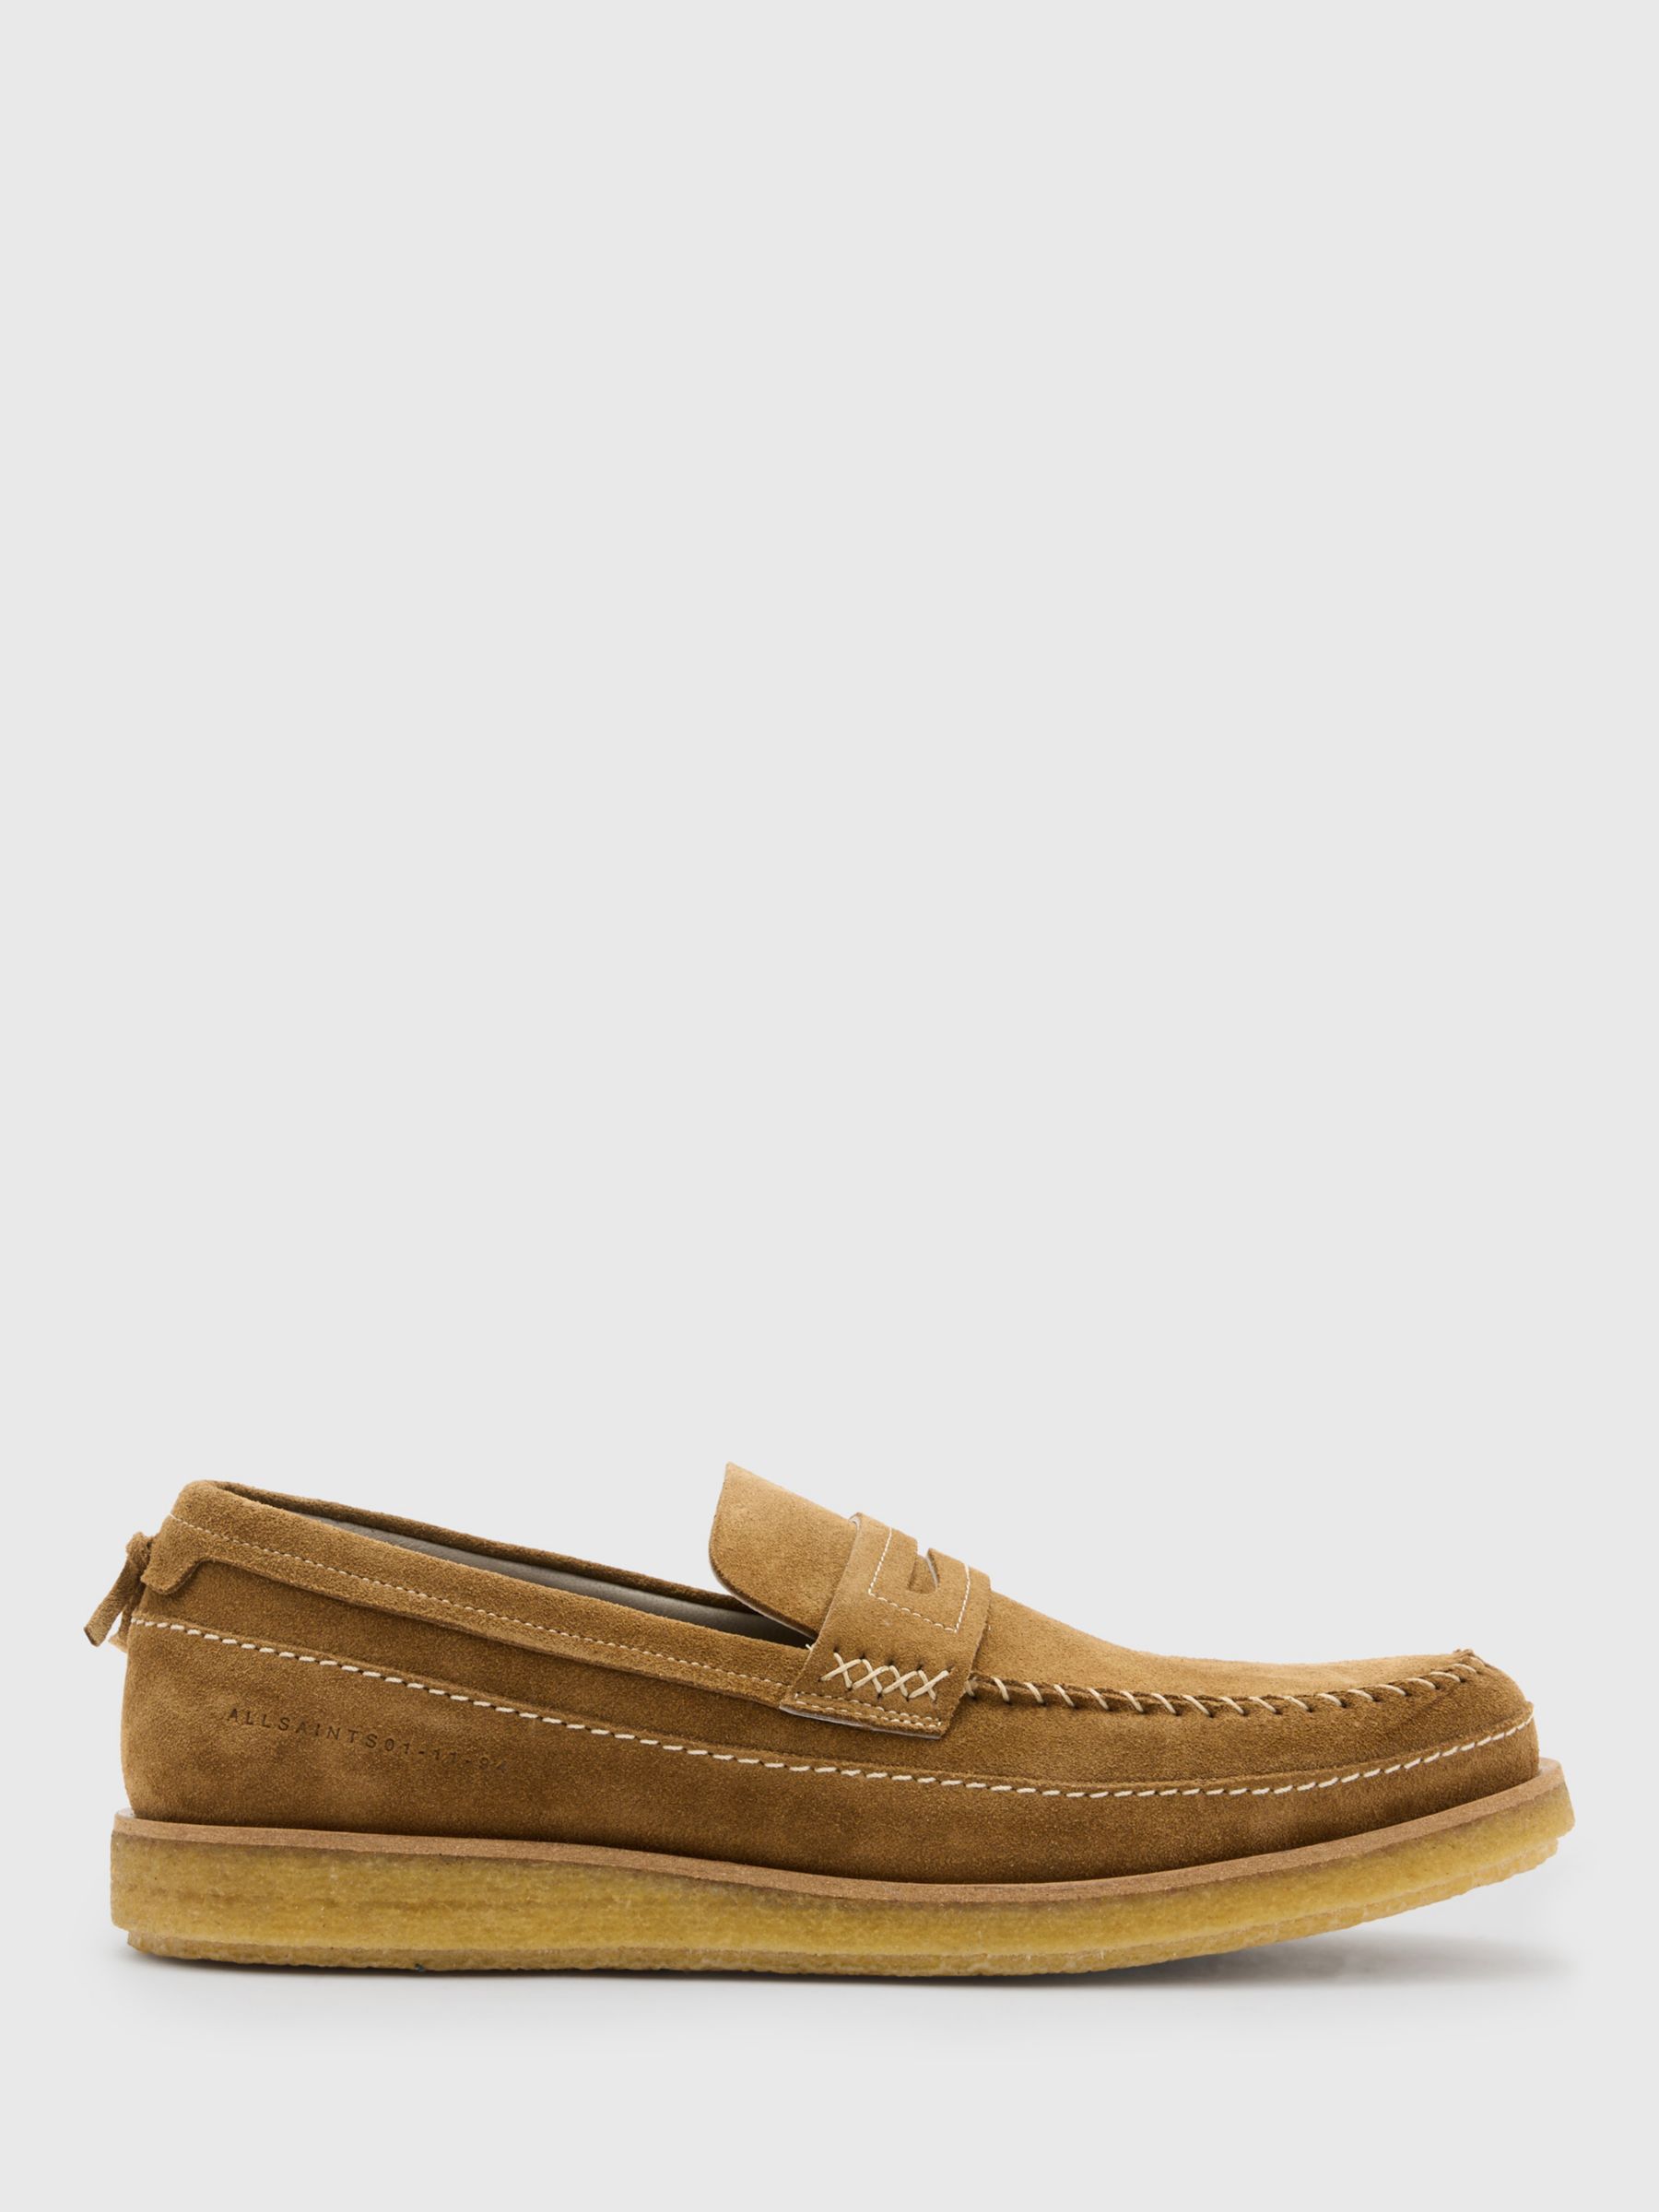 AllSaints Jago Leather Loafers, Tan, 10